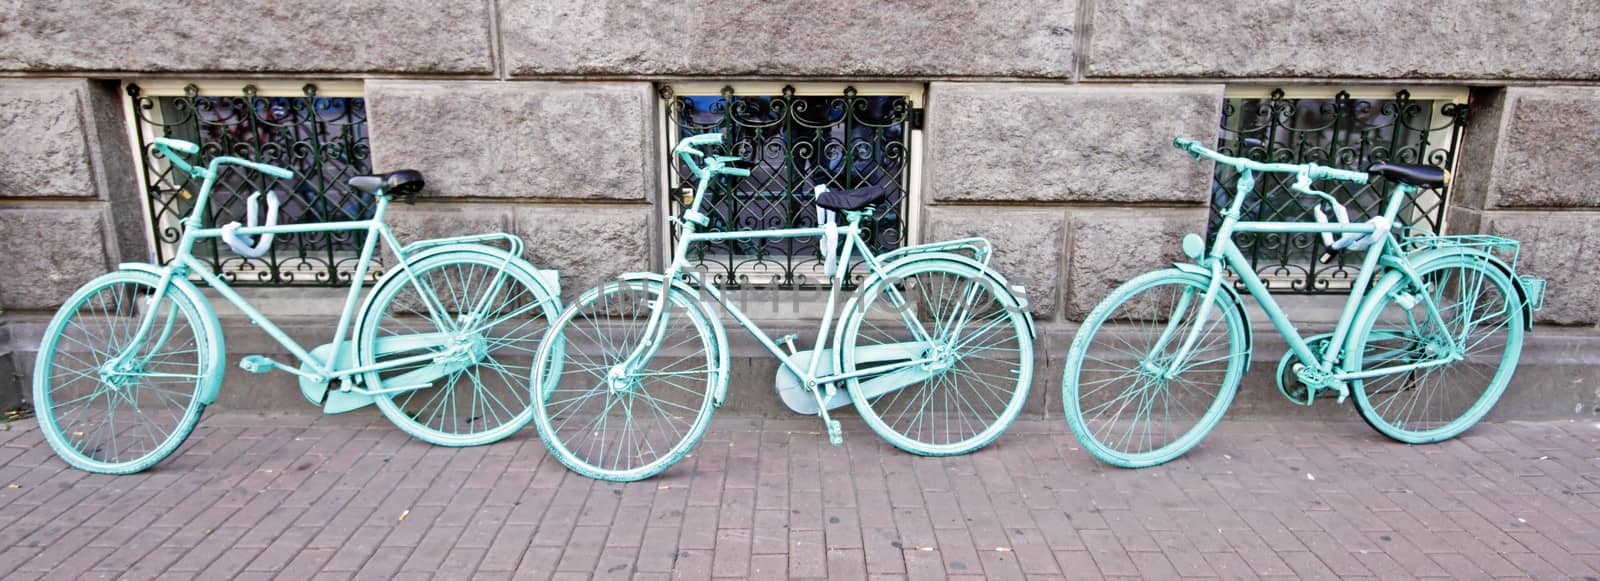 Three green bicycles against a wall in Amsterdam Netherlands